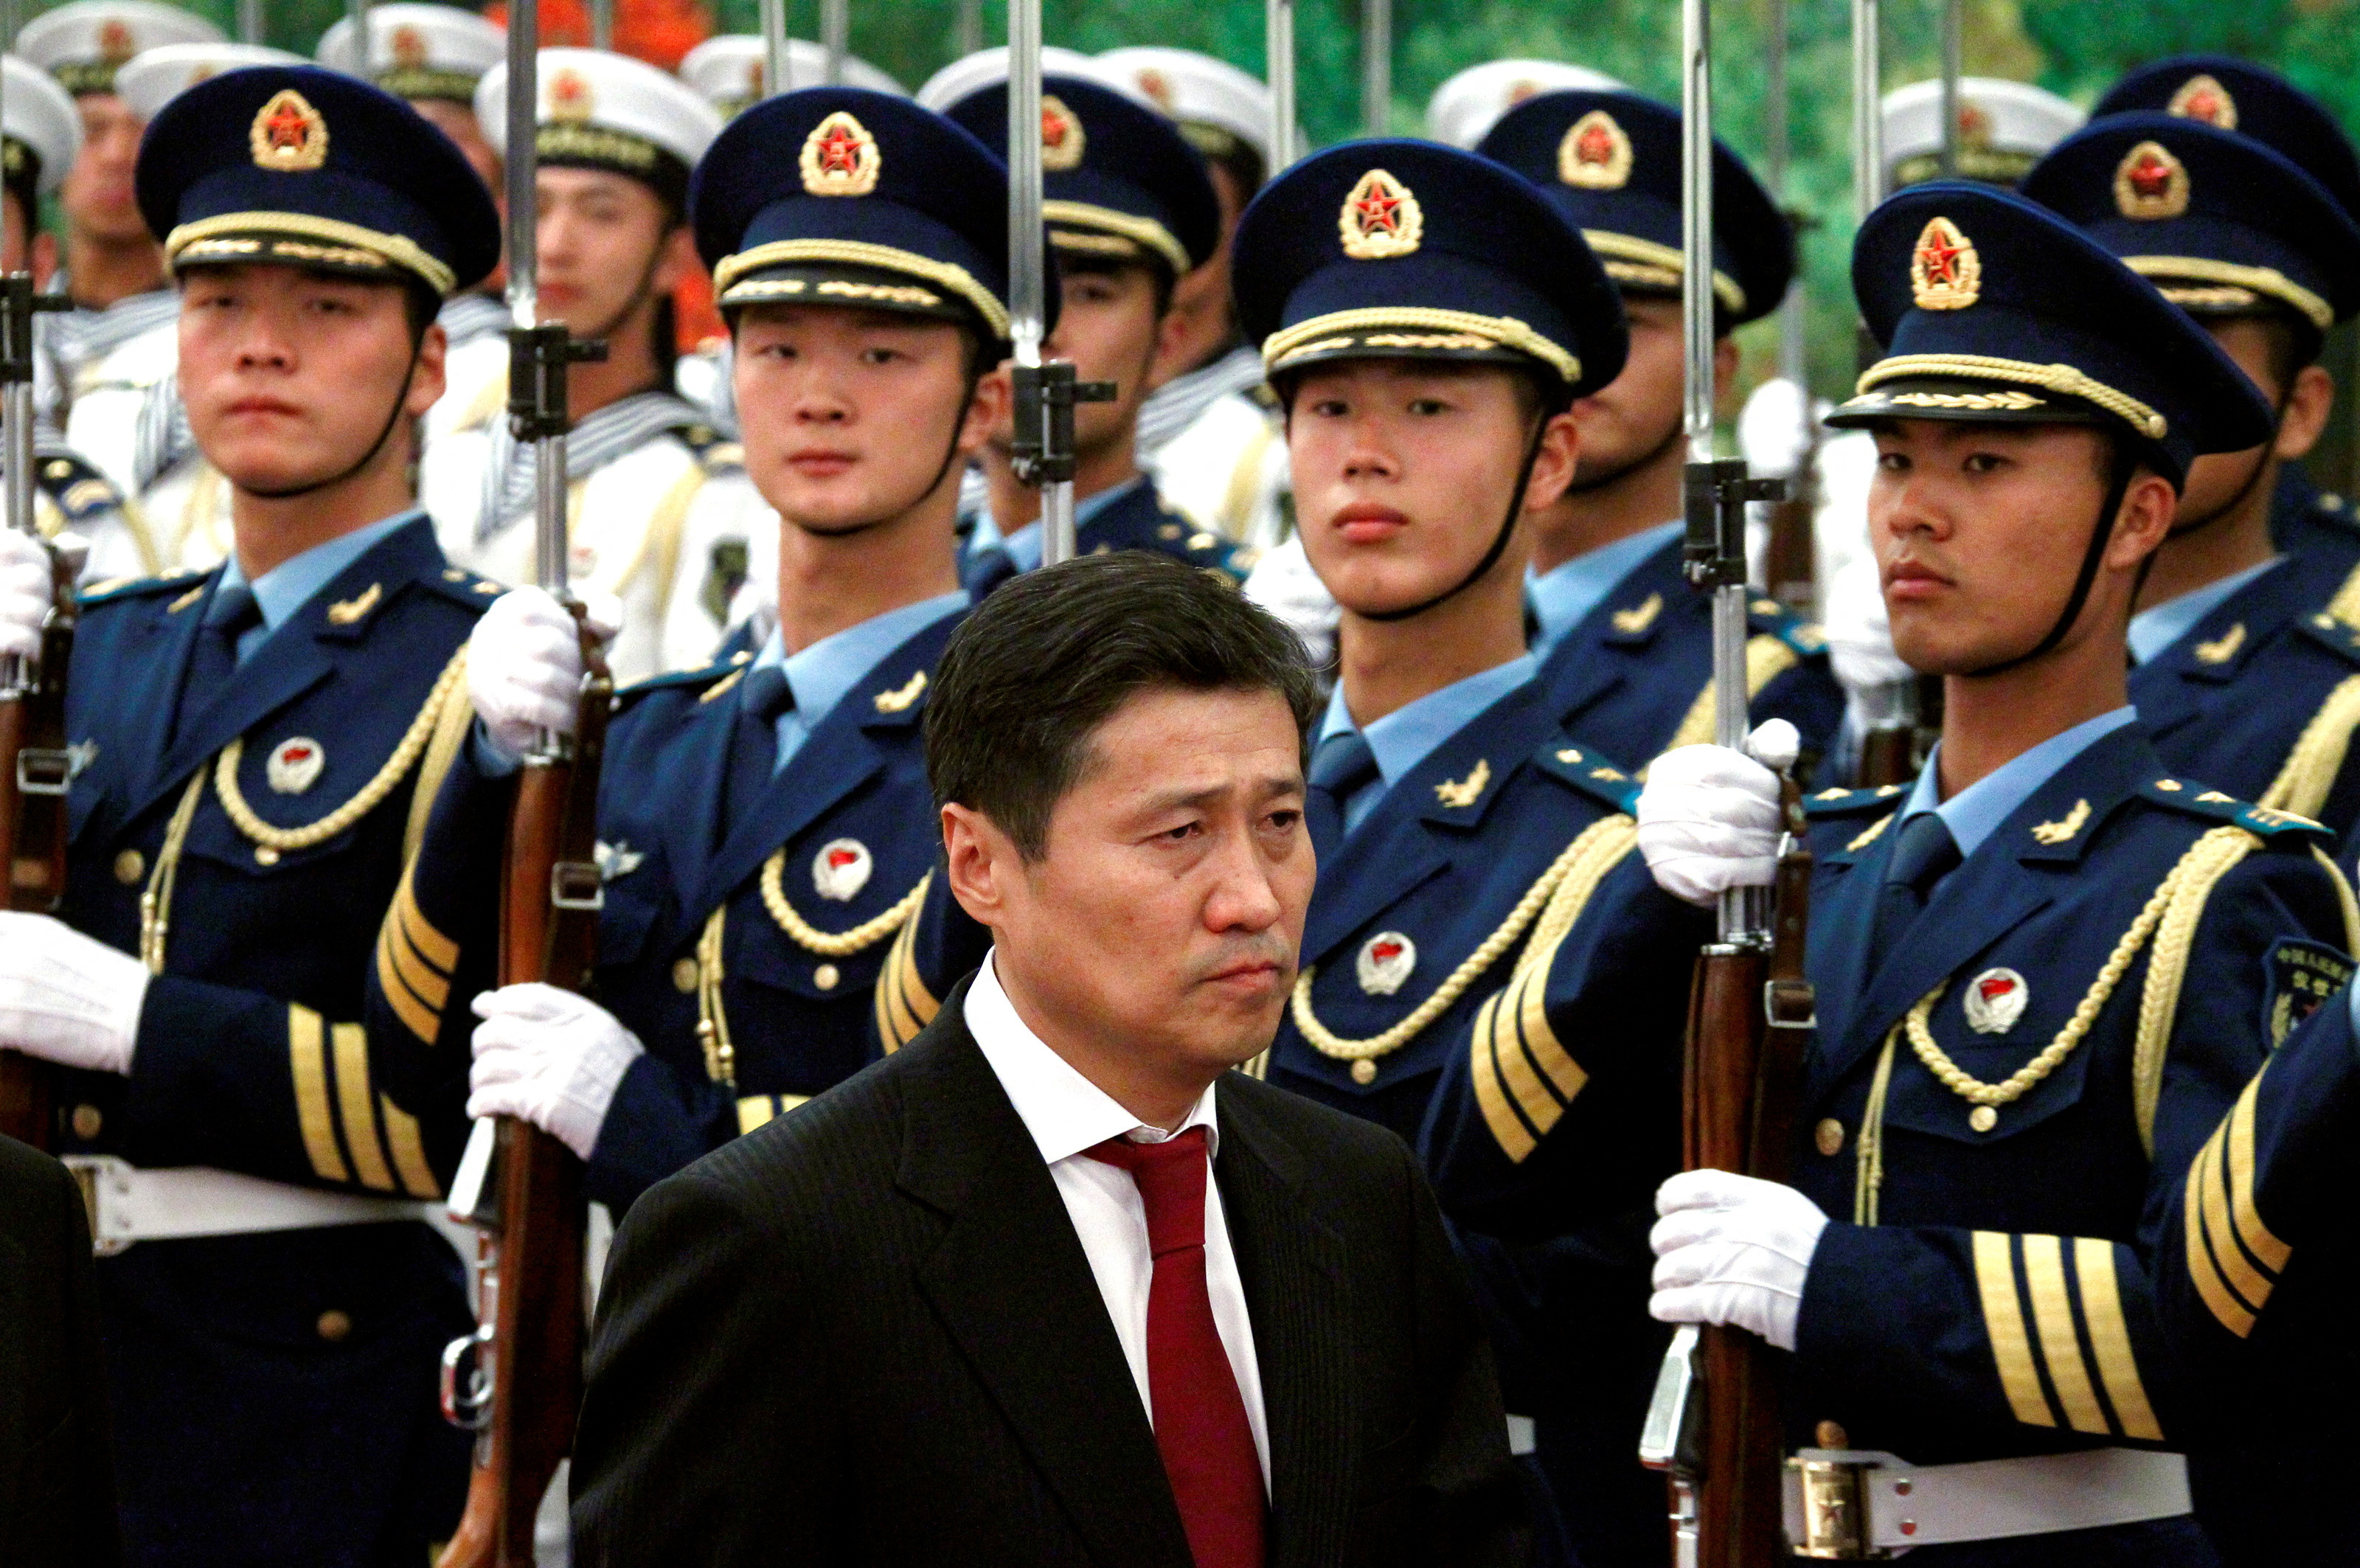 Mongolian Prime Minister Sukhbaatar Batbold inspects an honour guard during an official welcoming ceremony in the Great Hall of the People in Beijing